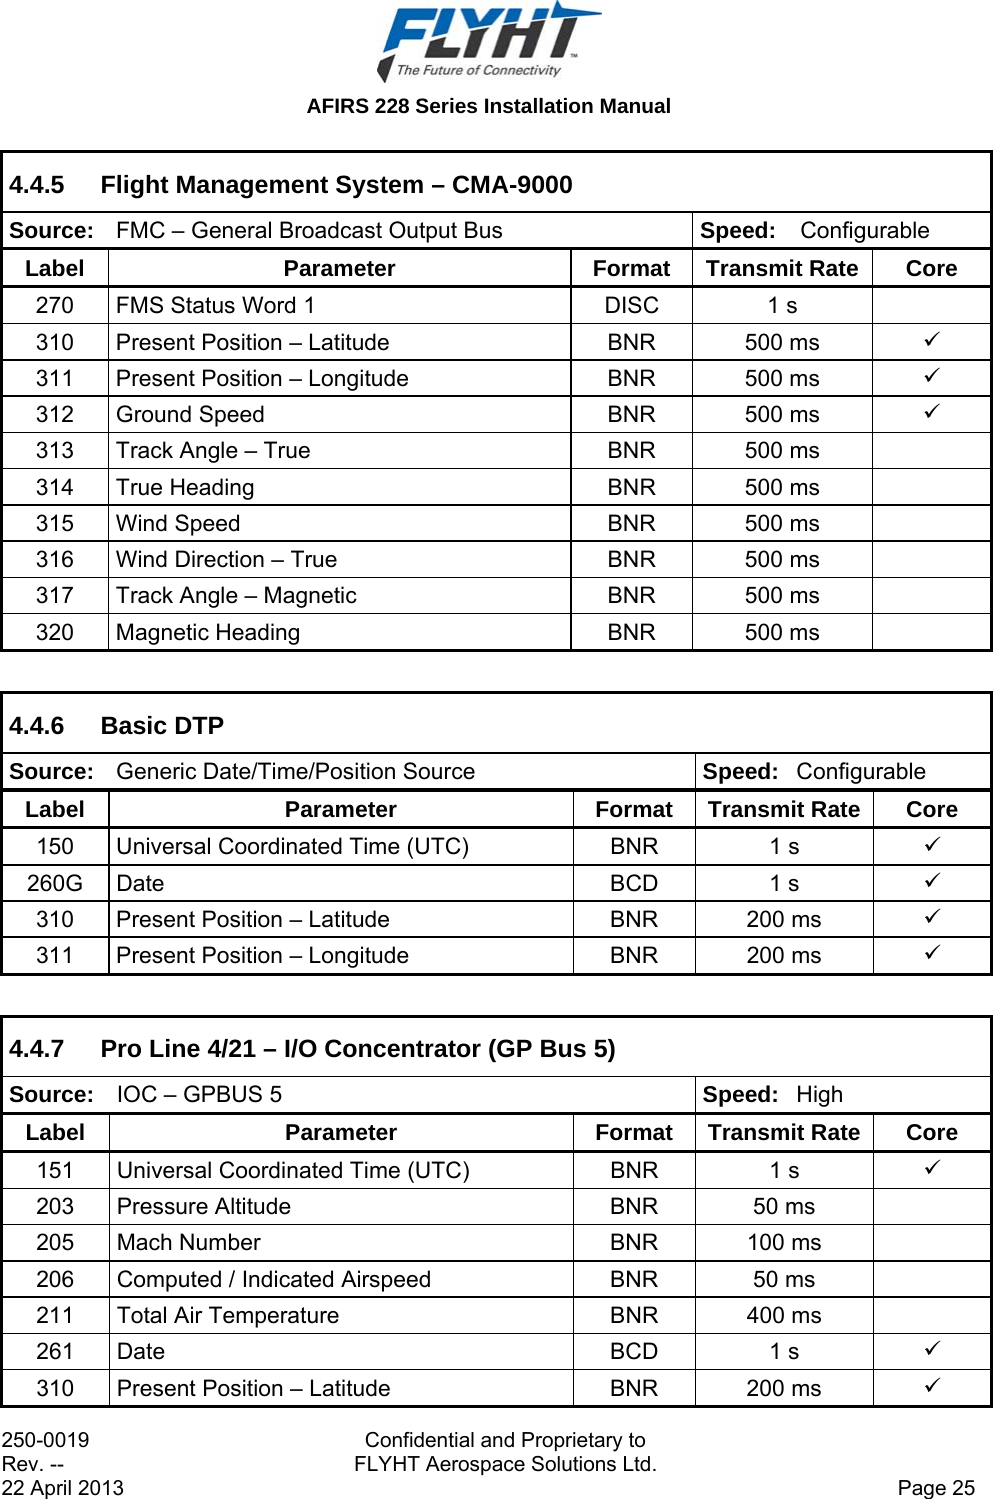  AFIRS 228 Series Installation Manual 250-0019  Confidential and Proprietary to Rev. --  FLYHT Aerospace Solutions Ltd. 22 April 2013    Page 25 4.4.5 Flight Management System – CMA-9000 Source:  FMC – General Broadcast Output Bus  Speed:  Configurable Label Parameter Format Transmit Rate Core 270  FMS Status Word 1  DISC  1 s   310  Present Position – Latitude  BNR  500 ms   311  Present Position – Longitude  BNR  500 ms   312  Ground Speed  BNR  500 ms   313  Track Angle – True  BNR  500 ms   314  True Heading  BNR  500 ms   315  Wind Speed  BNR  500 ms   316  Wind Direction – True  BNR  500 ms   317  Track Angle – Magnetic  BNR  500 ms   320  Magnetic Heading  BNR  500 ms    4.4.6 Basic DTP Source:  Generic Date/Time/Position Source  Speed:  Configurable Label Parameter Format Transmit Rate Core 150  Universal Coordinated Time (UTC)  BNR  1 s   260G Date  BCD  1 s   310  Present Position – Latitude  BNR  200 ms   311  Present Position – Longitude  BNR  200 ms    4.4.7  Pro Line 4/21 – I/O Concentrator (GP Bus 5) Source:  IOC – GPBUS 5  Speed:  High Label Parameter Format Transmit Rate Core 151  Universal Coordinated Time (UTC)  BNR  1 s   203  Pressure Altitude  BNR  50 ms   205  Mach Number  BNR  100 ms   206  Computed / Indicated Airspeed  BNR  50 ms   211  Total Air Temperature  BNR  400 ms   261 Date  BCD  1 s   310  Present Position – Latitude  BNR  200 ms   